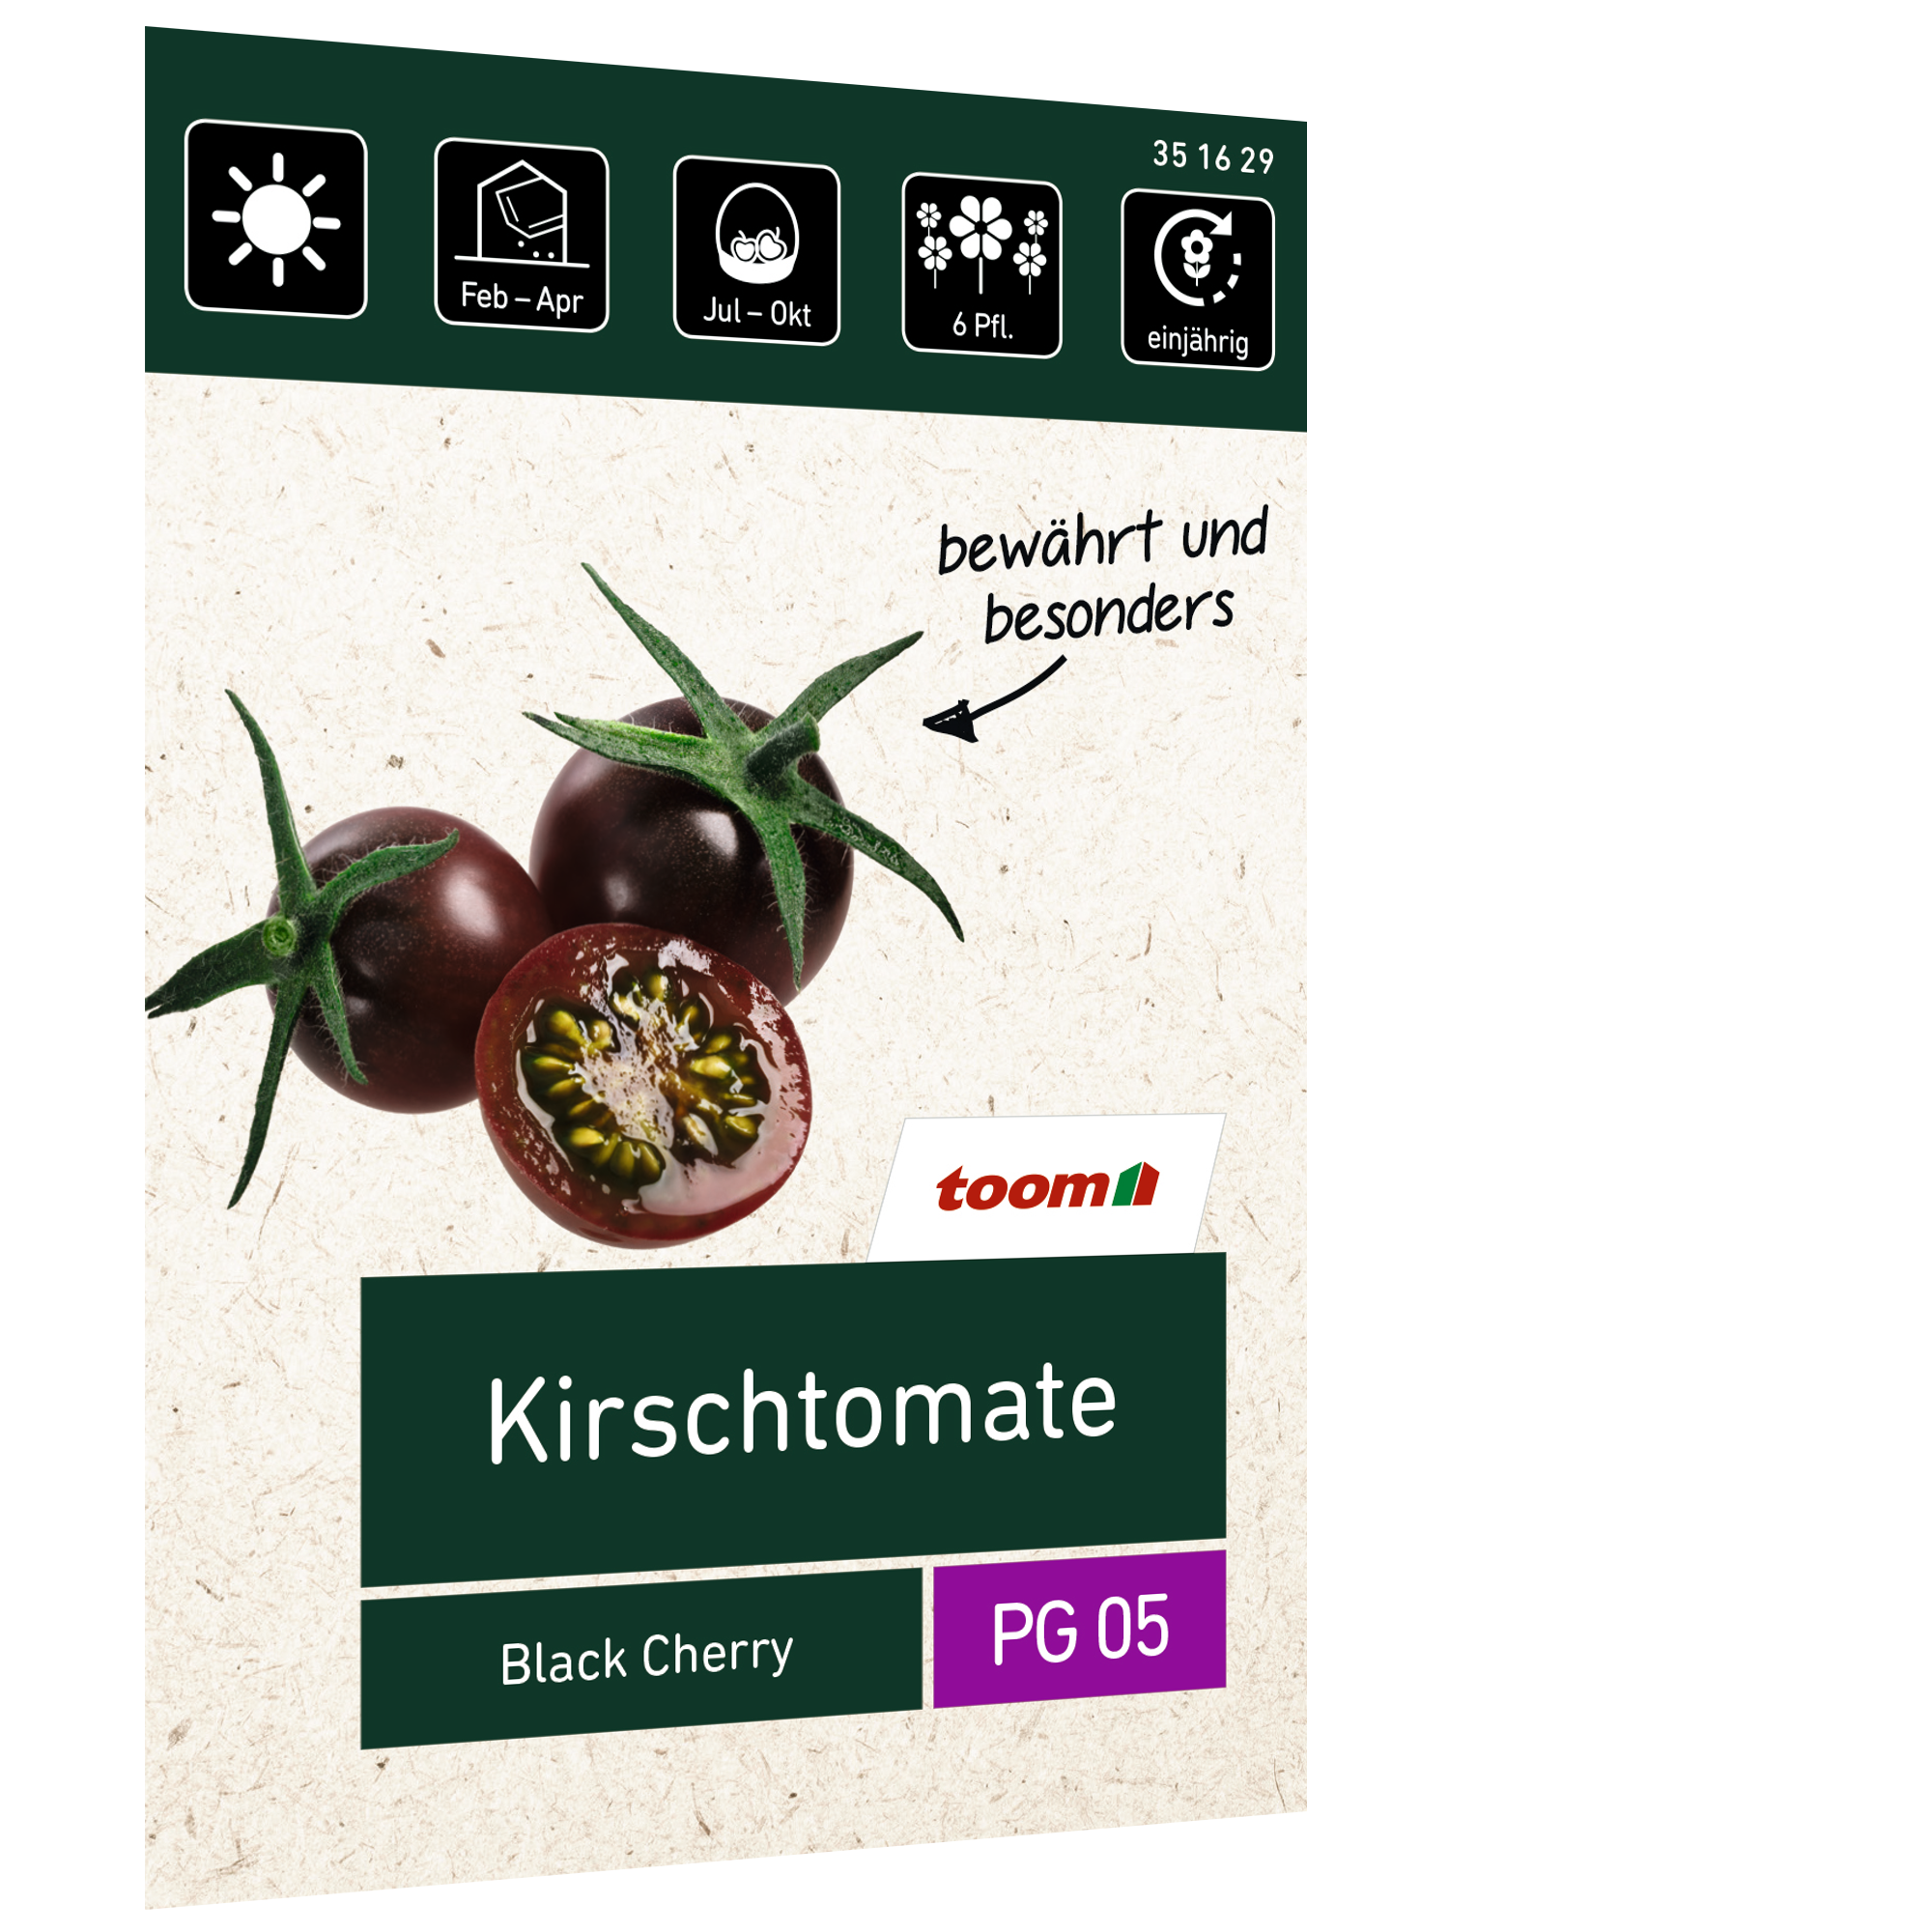 Kirschtomate 'Black Cherry' + product picture